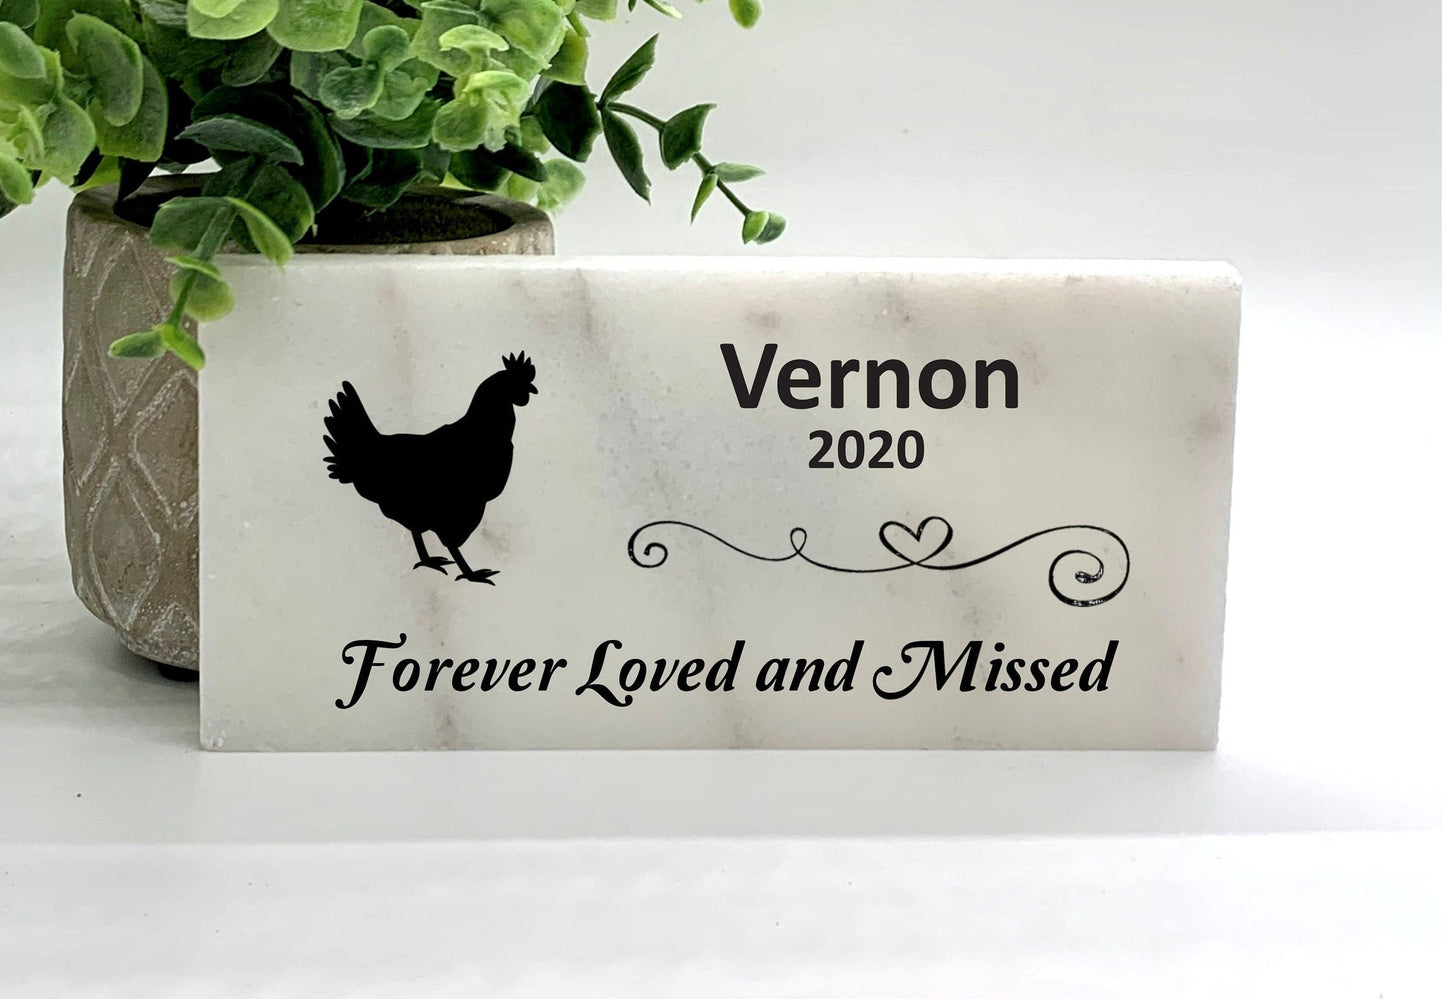 Chicken Memorial Stone - "Forever Loved and Missed"